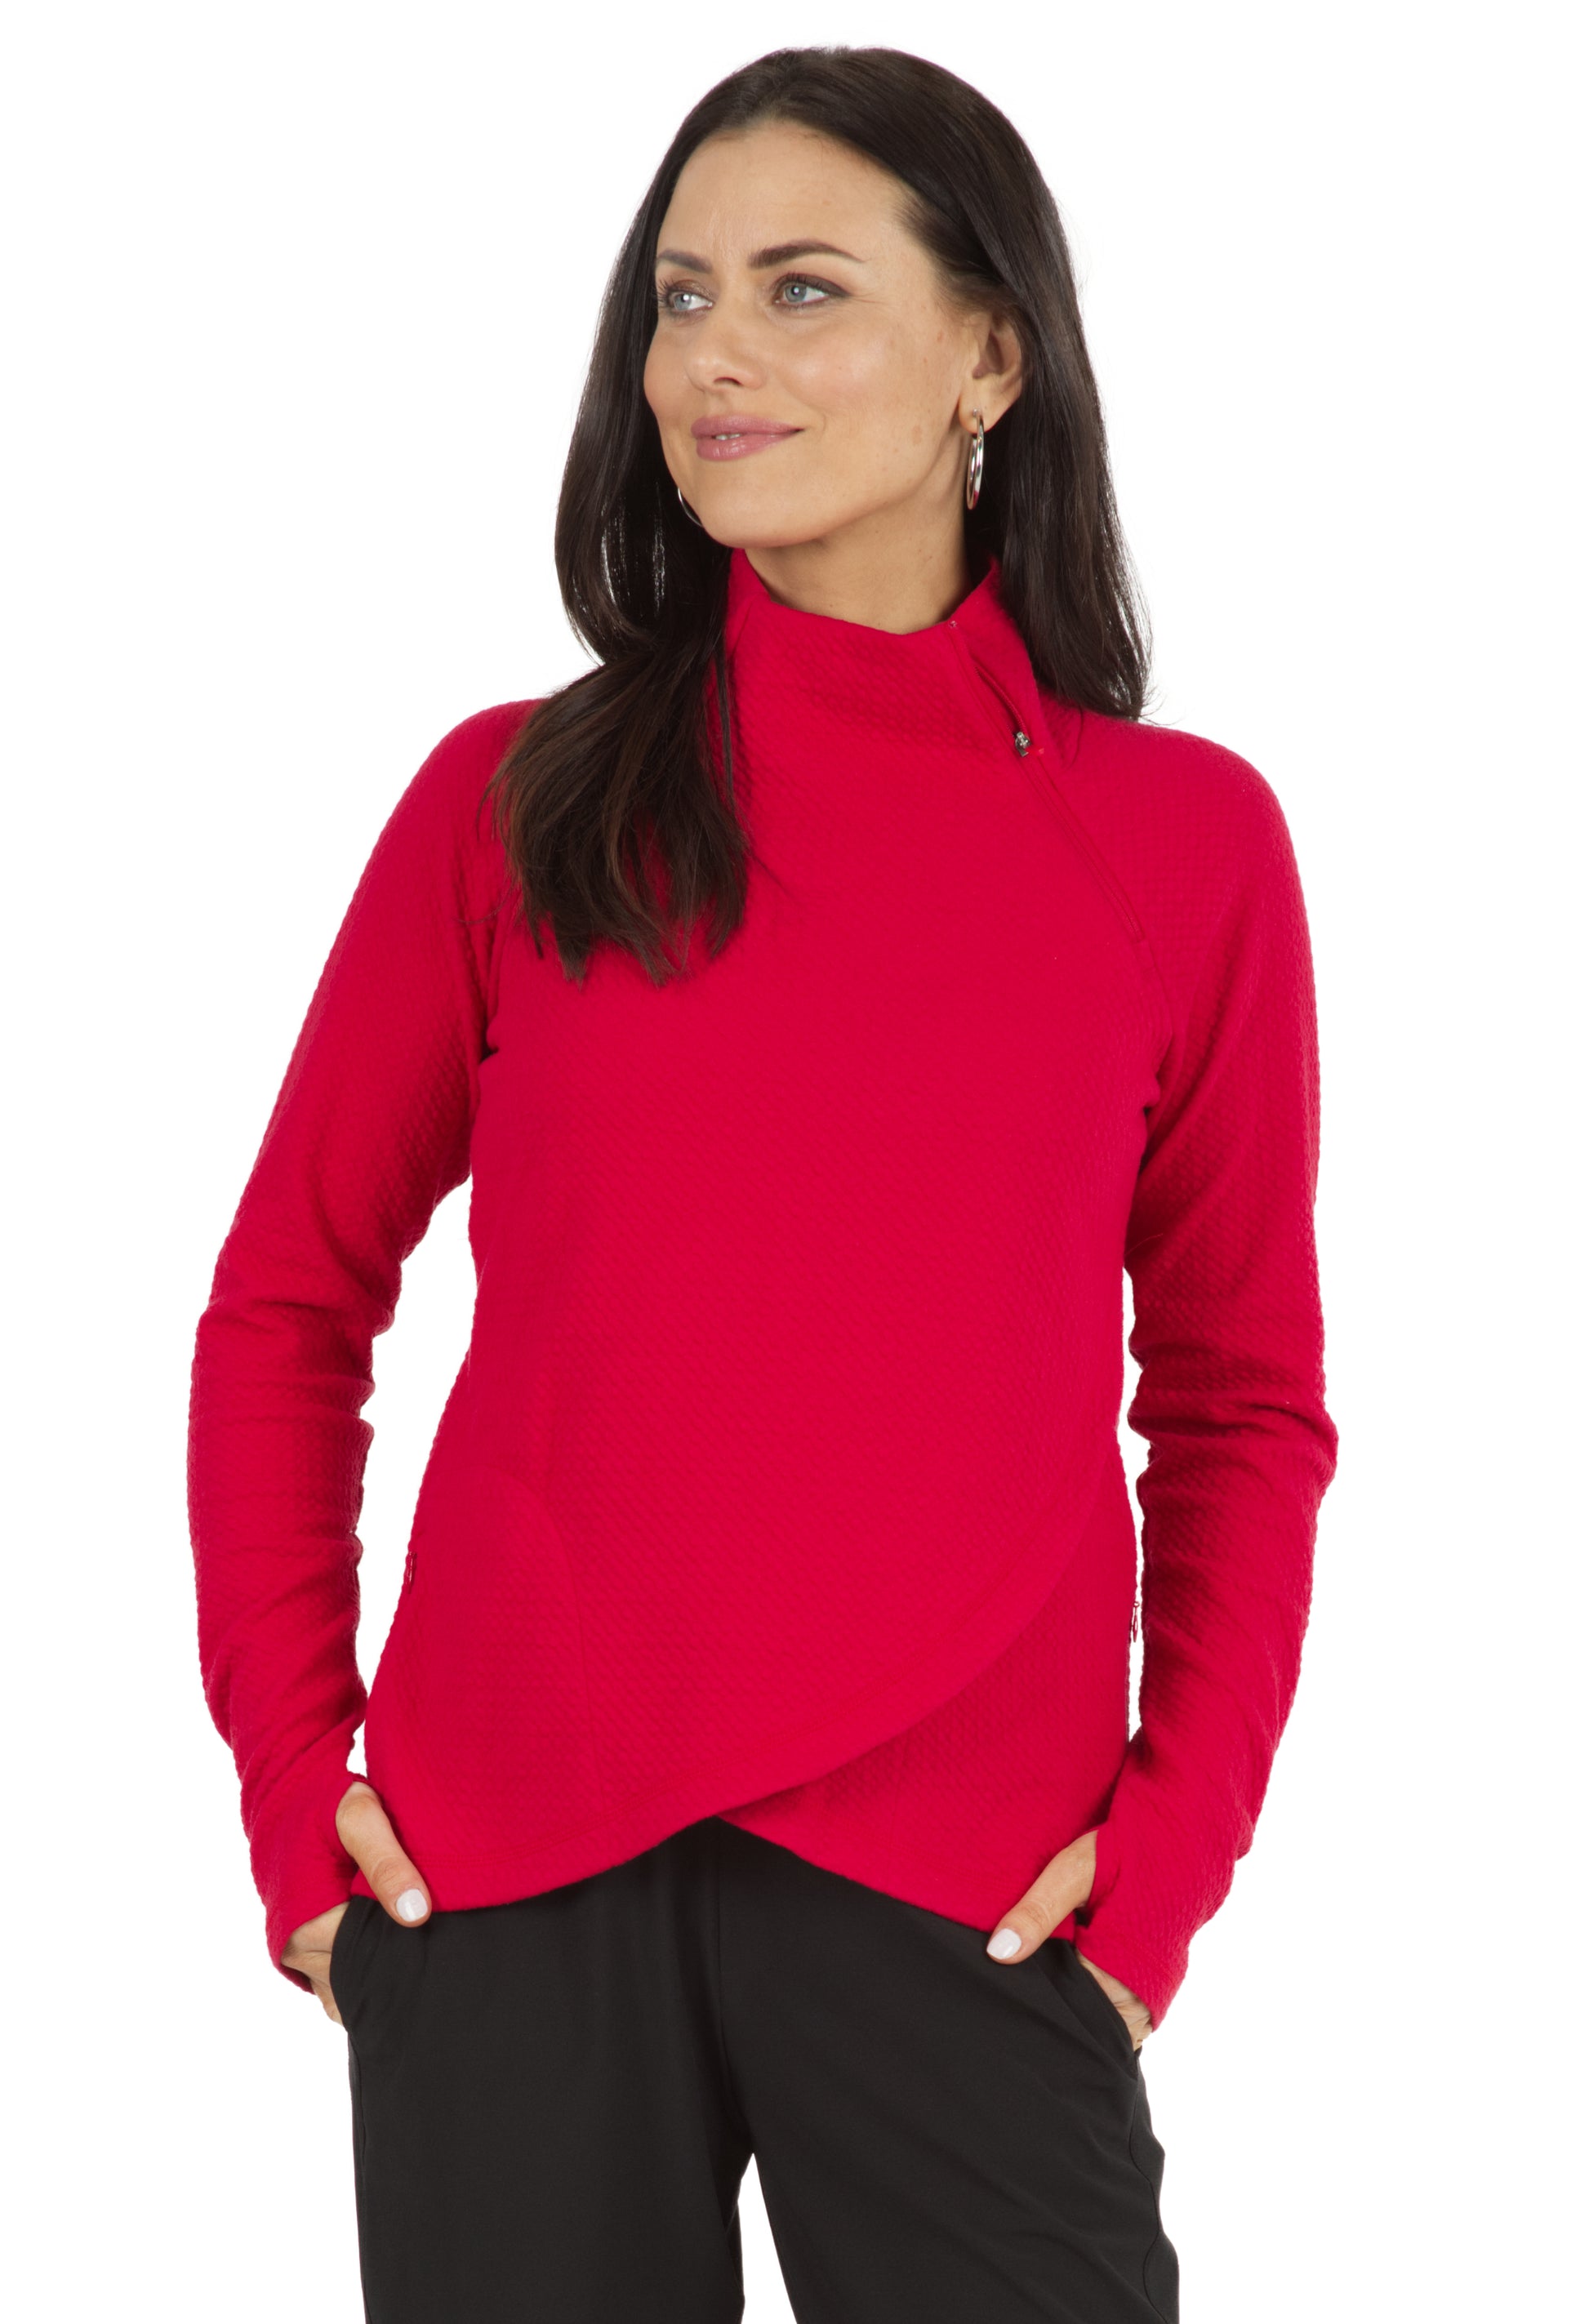 IBKÜL - Solid Popcorn Stitch Asymmetrical Zip Pullover - 64000 - Color: Red